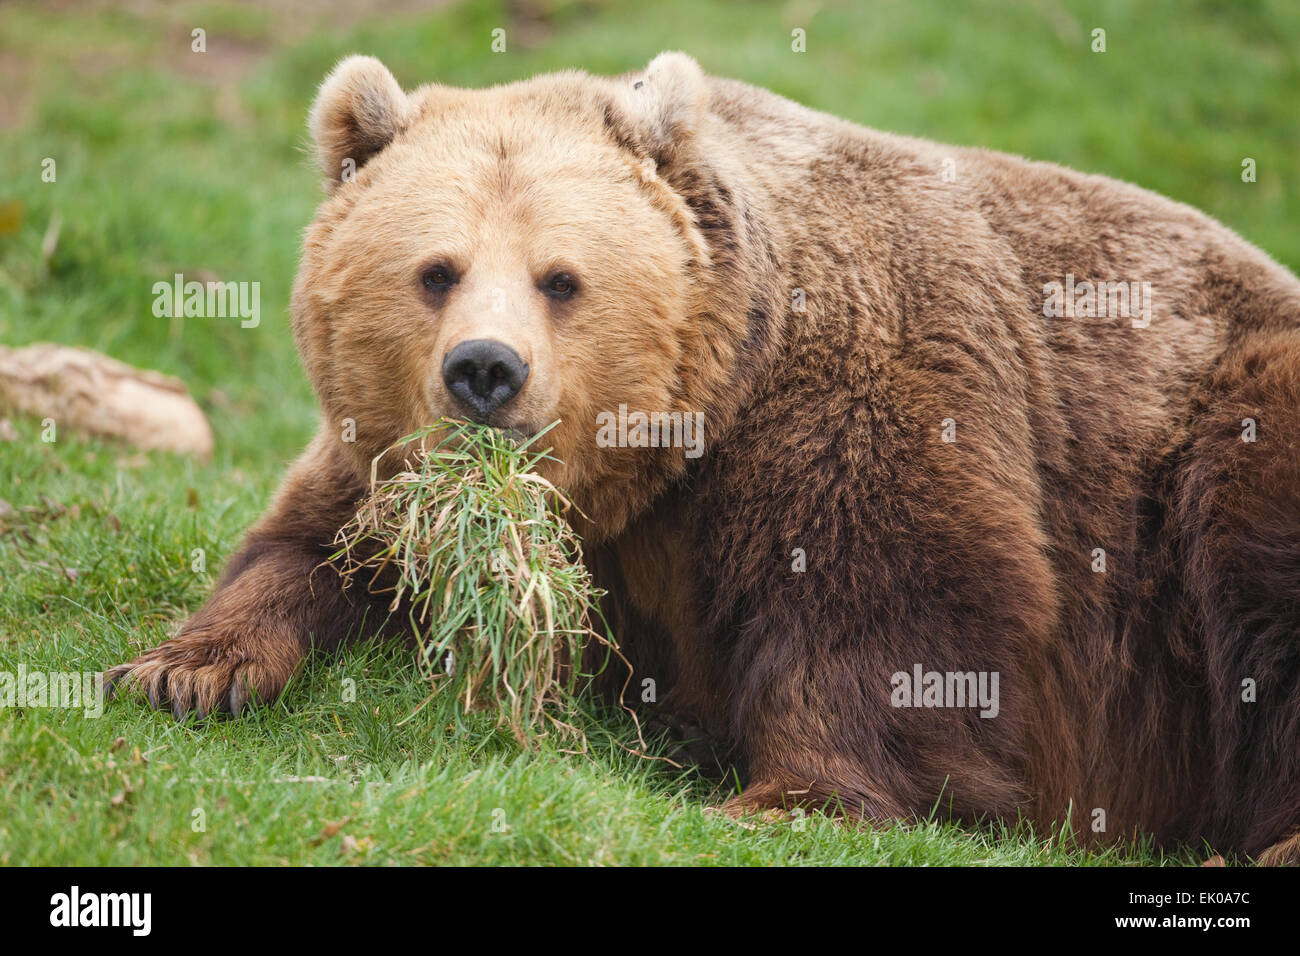 European Brown Bear (Ursus arctos arctos). Omnivorous nature of an animal  described as carnivore shown by grass held in mouth. Stock Photo